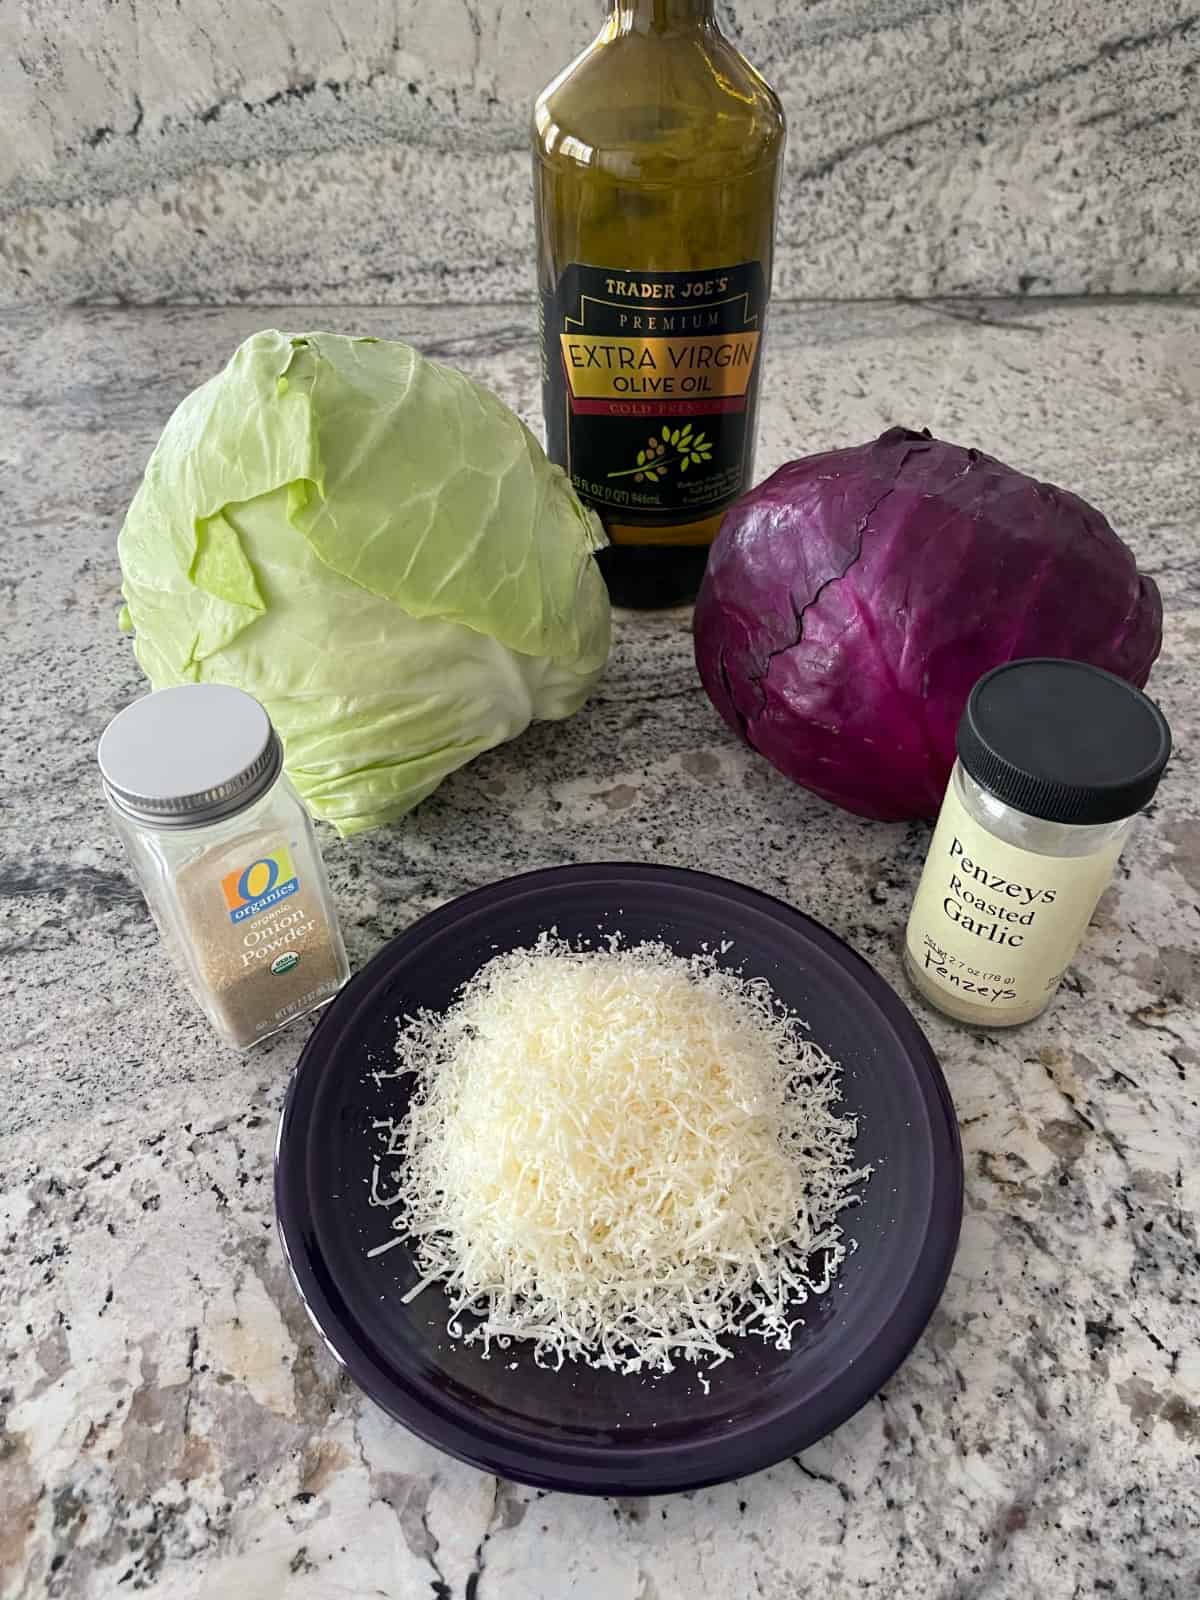 Ingredients including head of green cabbage, head of purple cabbage, grated Parmesan cheese, onion powder and garlic powder.